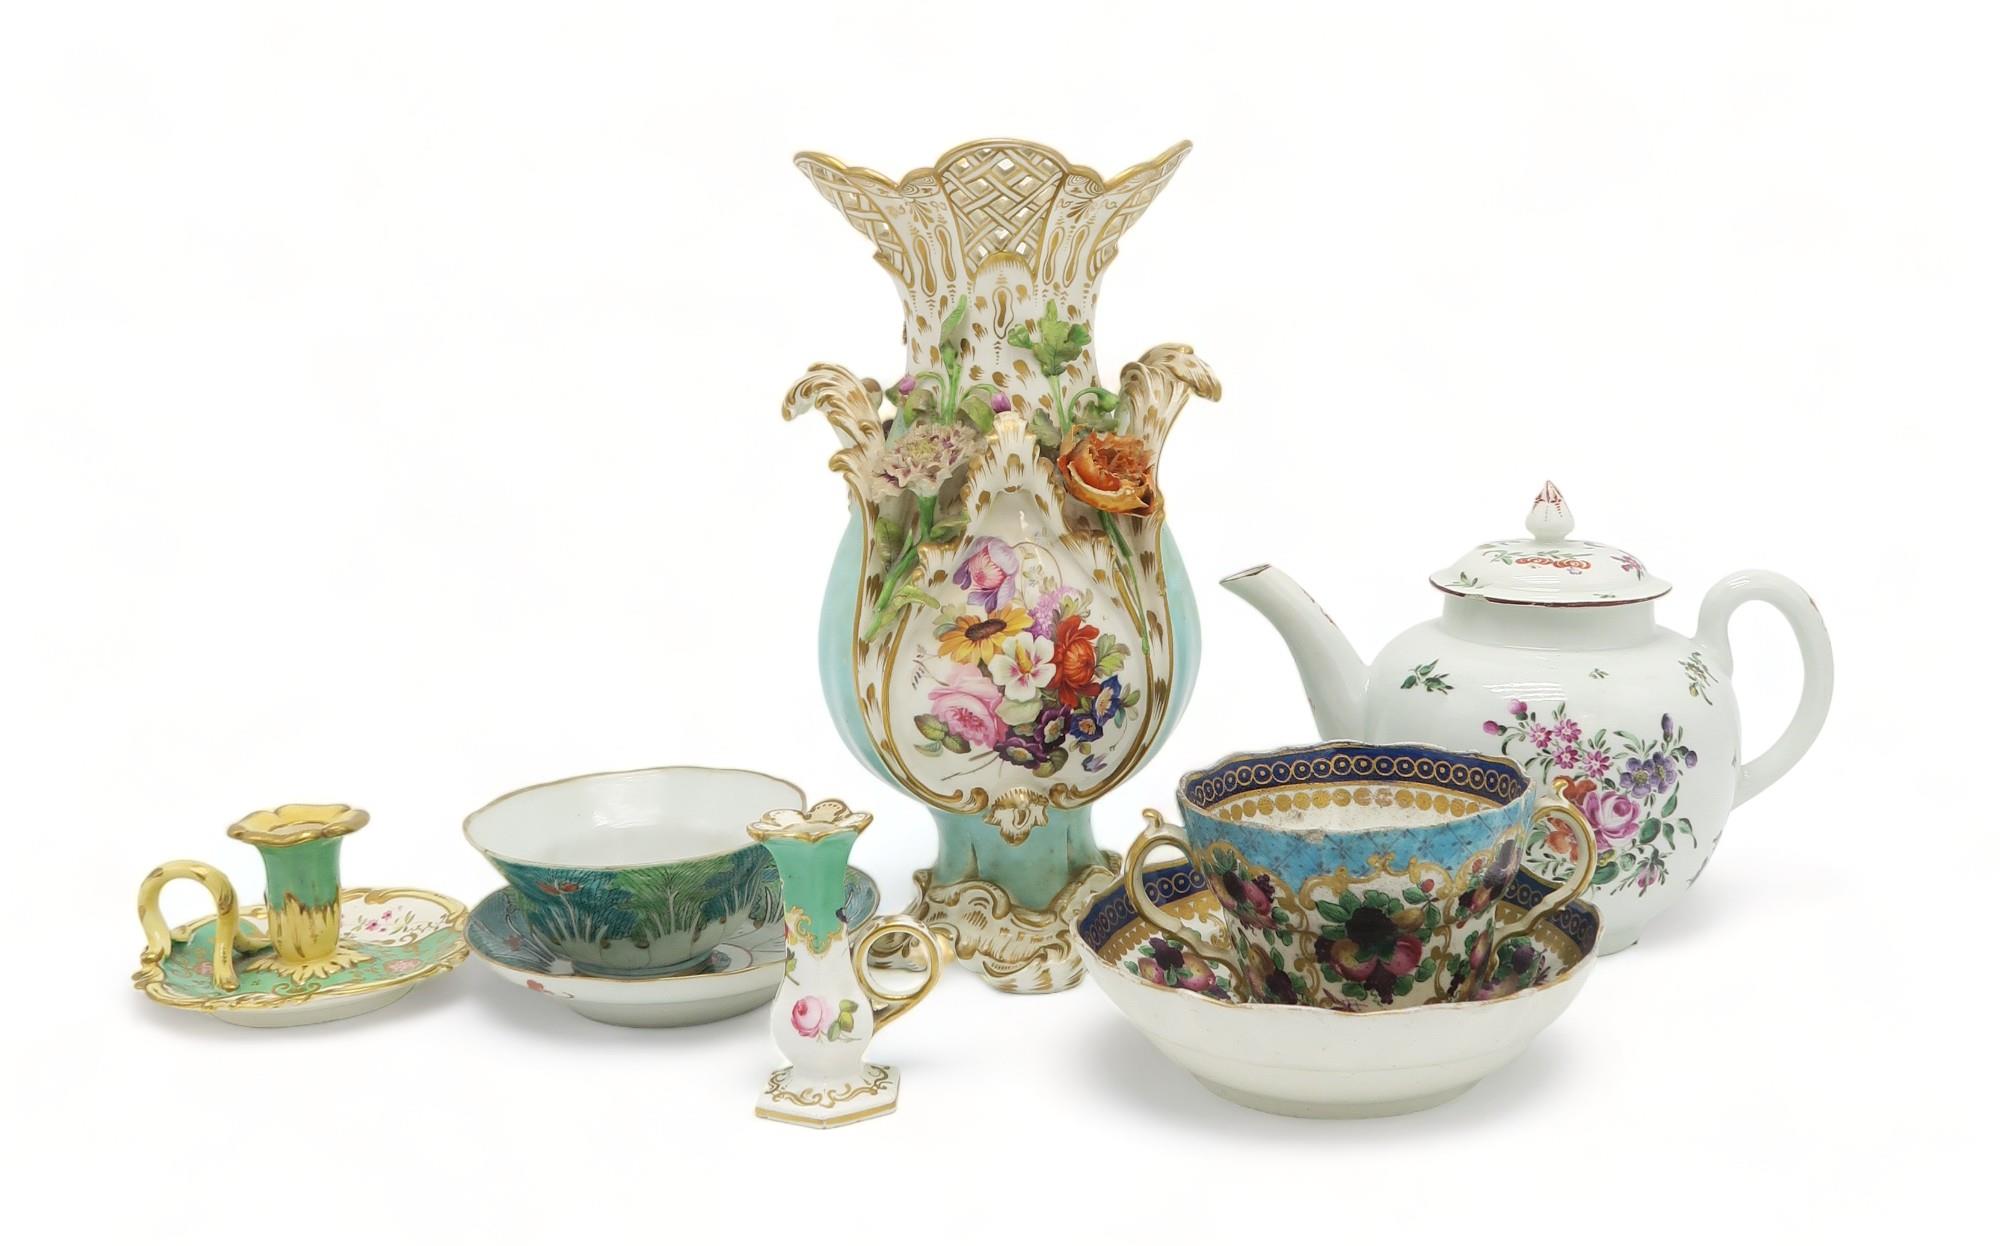 AN 18TH CENTURY WORCESTER TEAPOT of bullet form, painted with floral sprays, together with a later